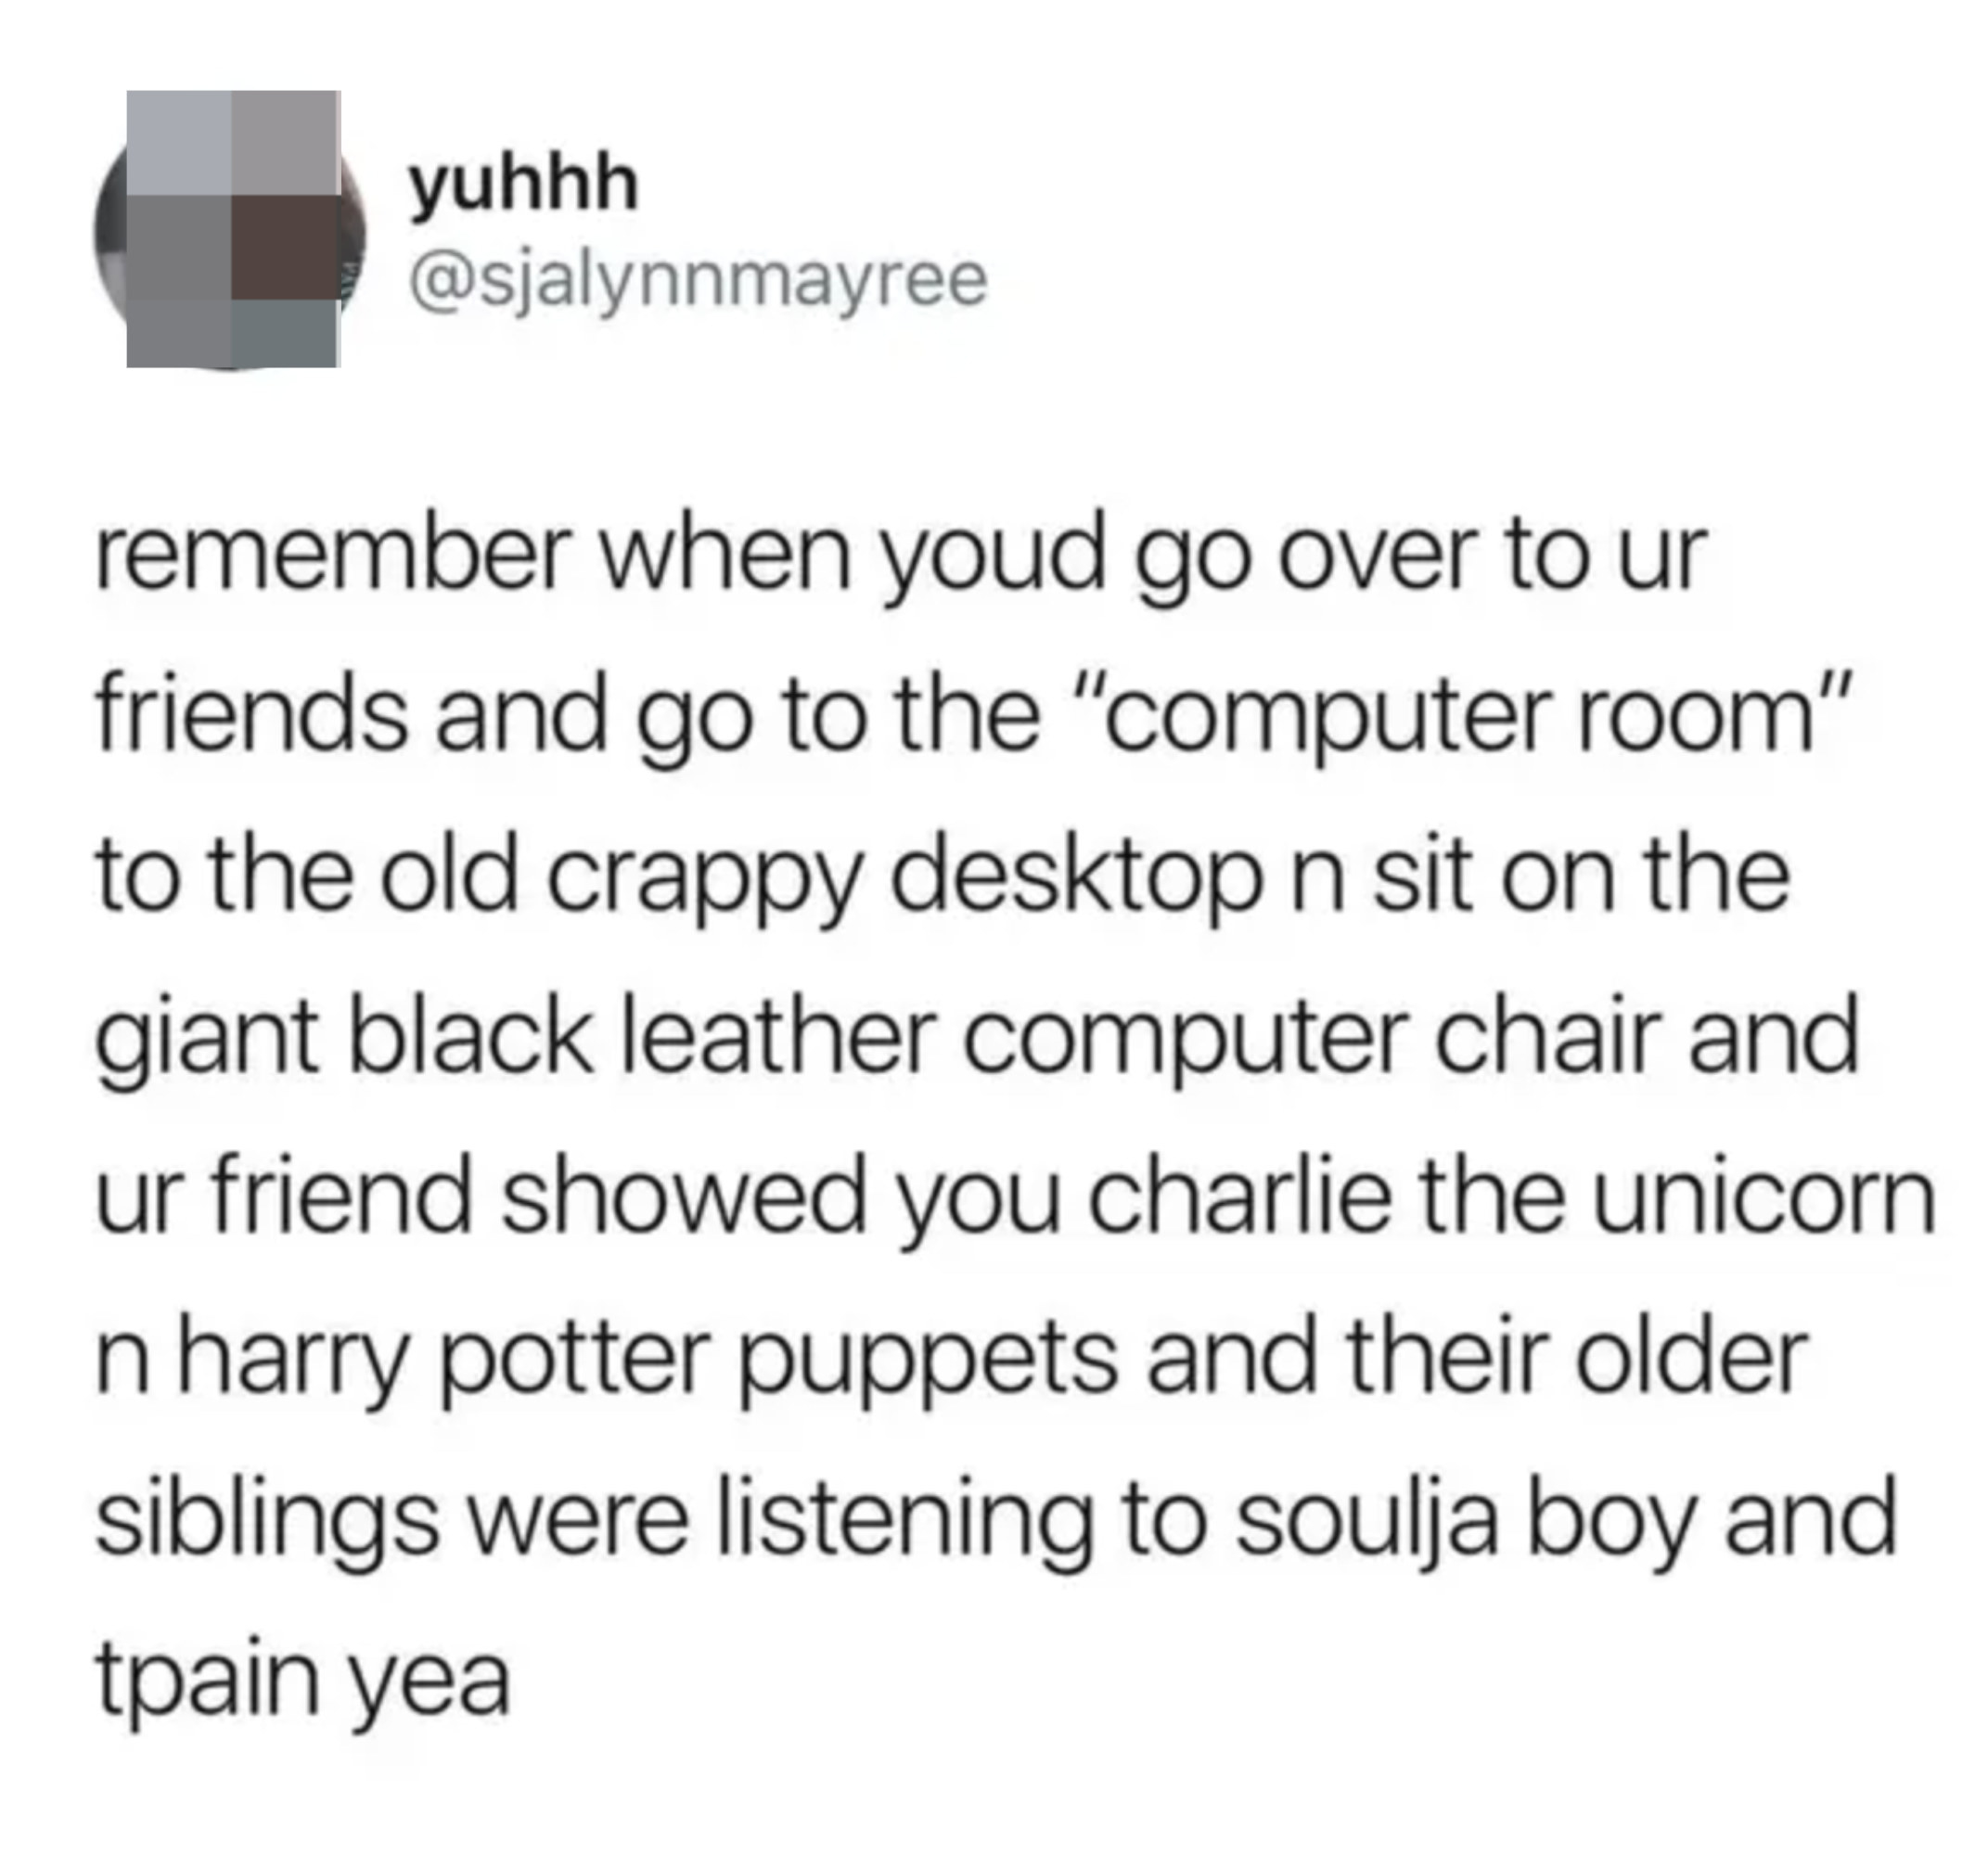 Tweet about the existence of a computer room being a thing